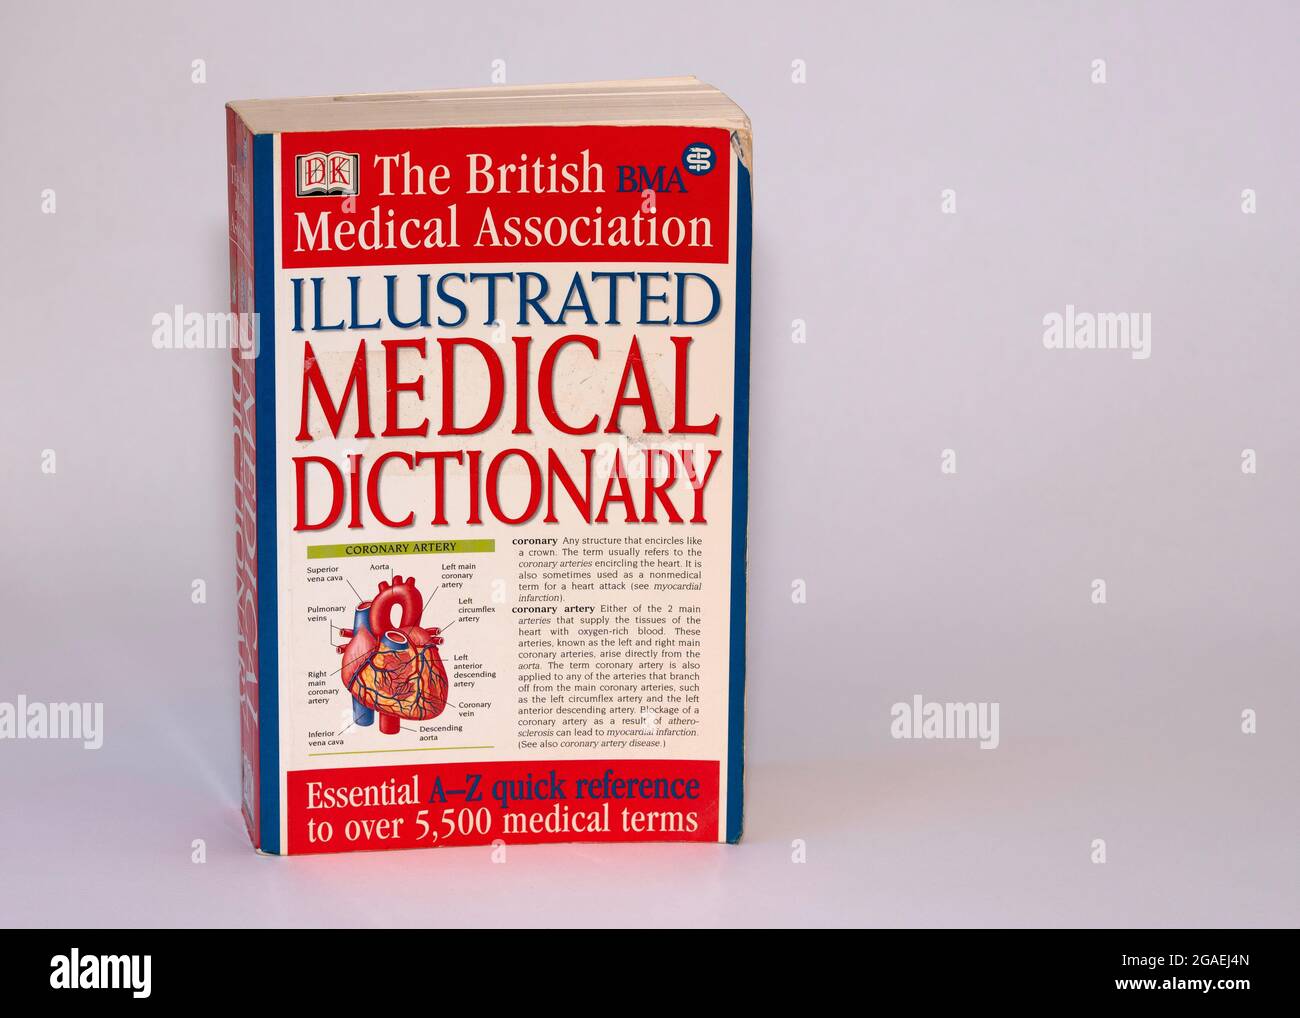 The British Medical Association Illustrated Medical Dictionary Taschenbuch Stockfoto